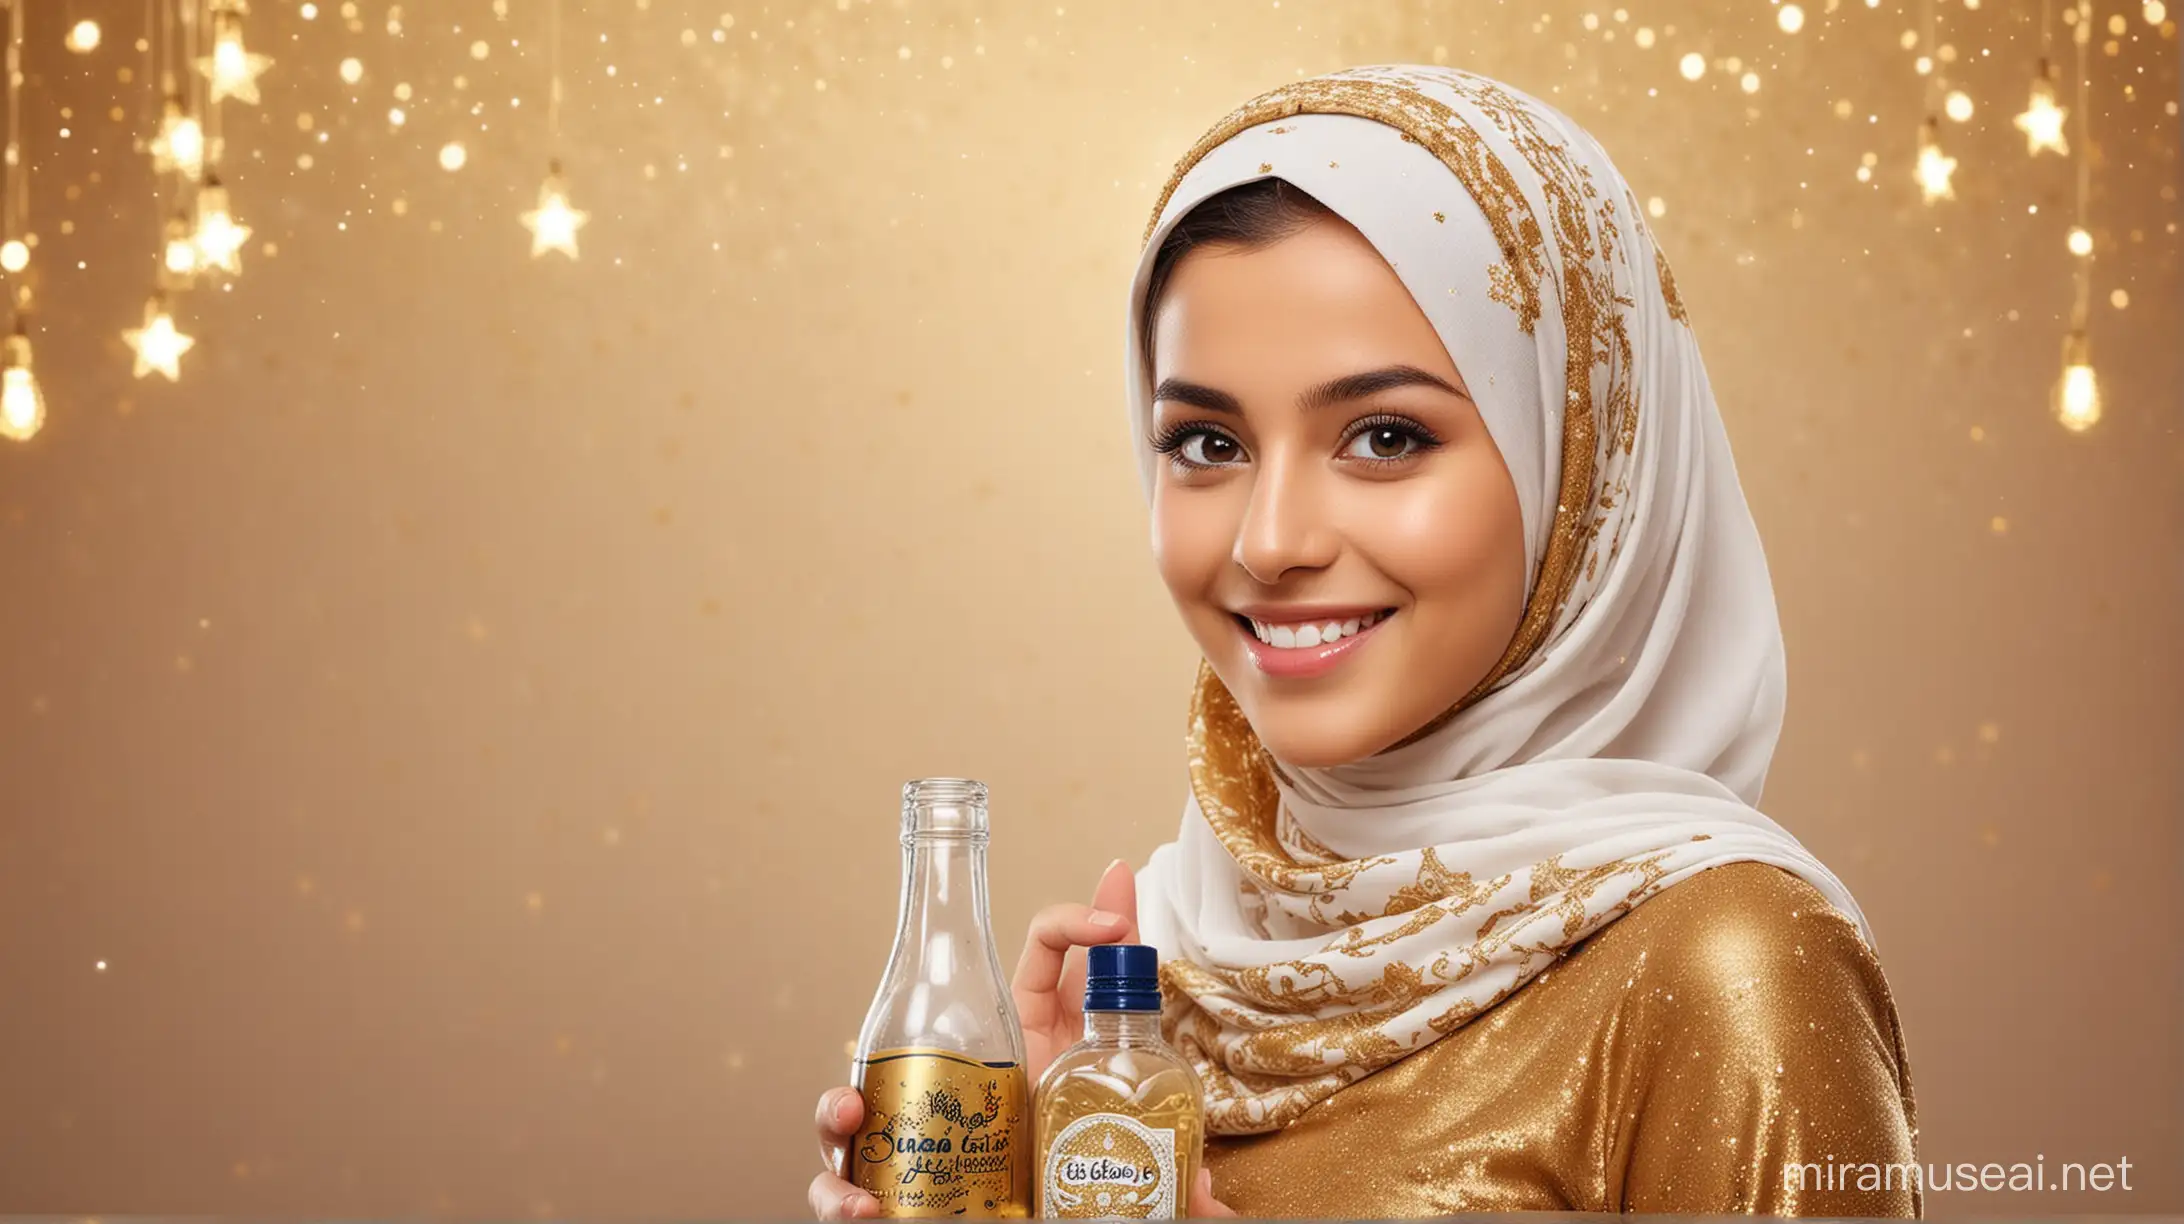 7 year only beautiful muslim girl wearing hijab with cute smile,white skin with eid festival background, with one bottle on hand, mid photo up to belley,graphics eid festival bg, glossy golden back ground with sparkles, and stars, right aranged photo boobs size 34, right aranged